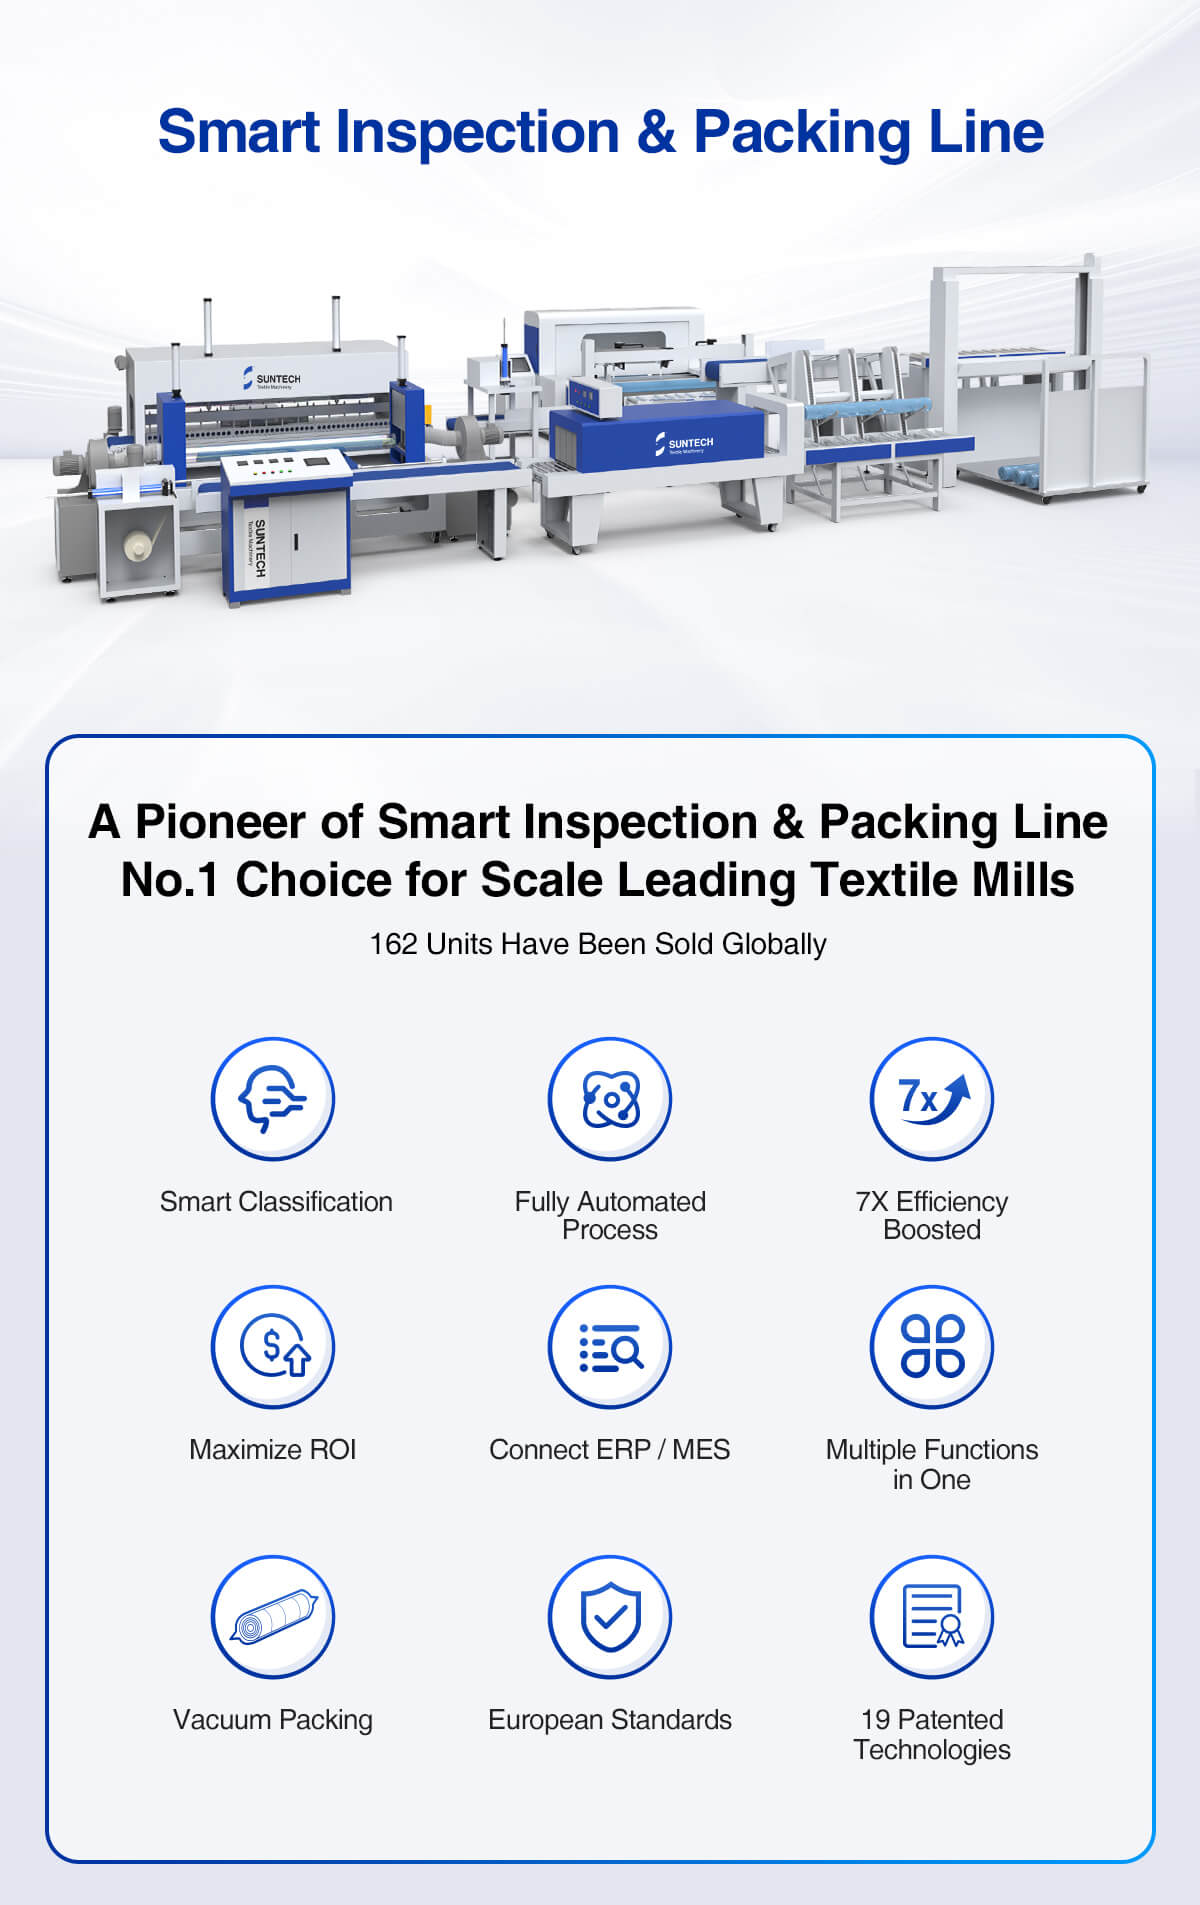 Smart Inspection & Packing Line